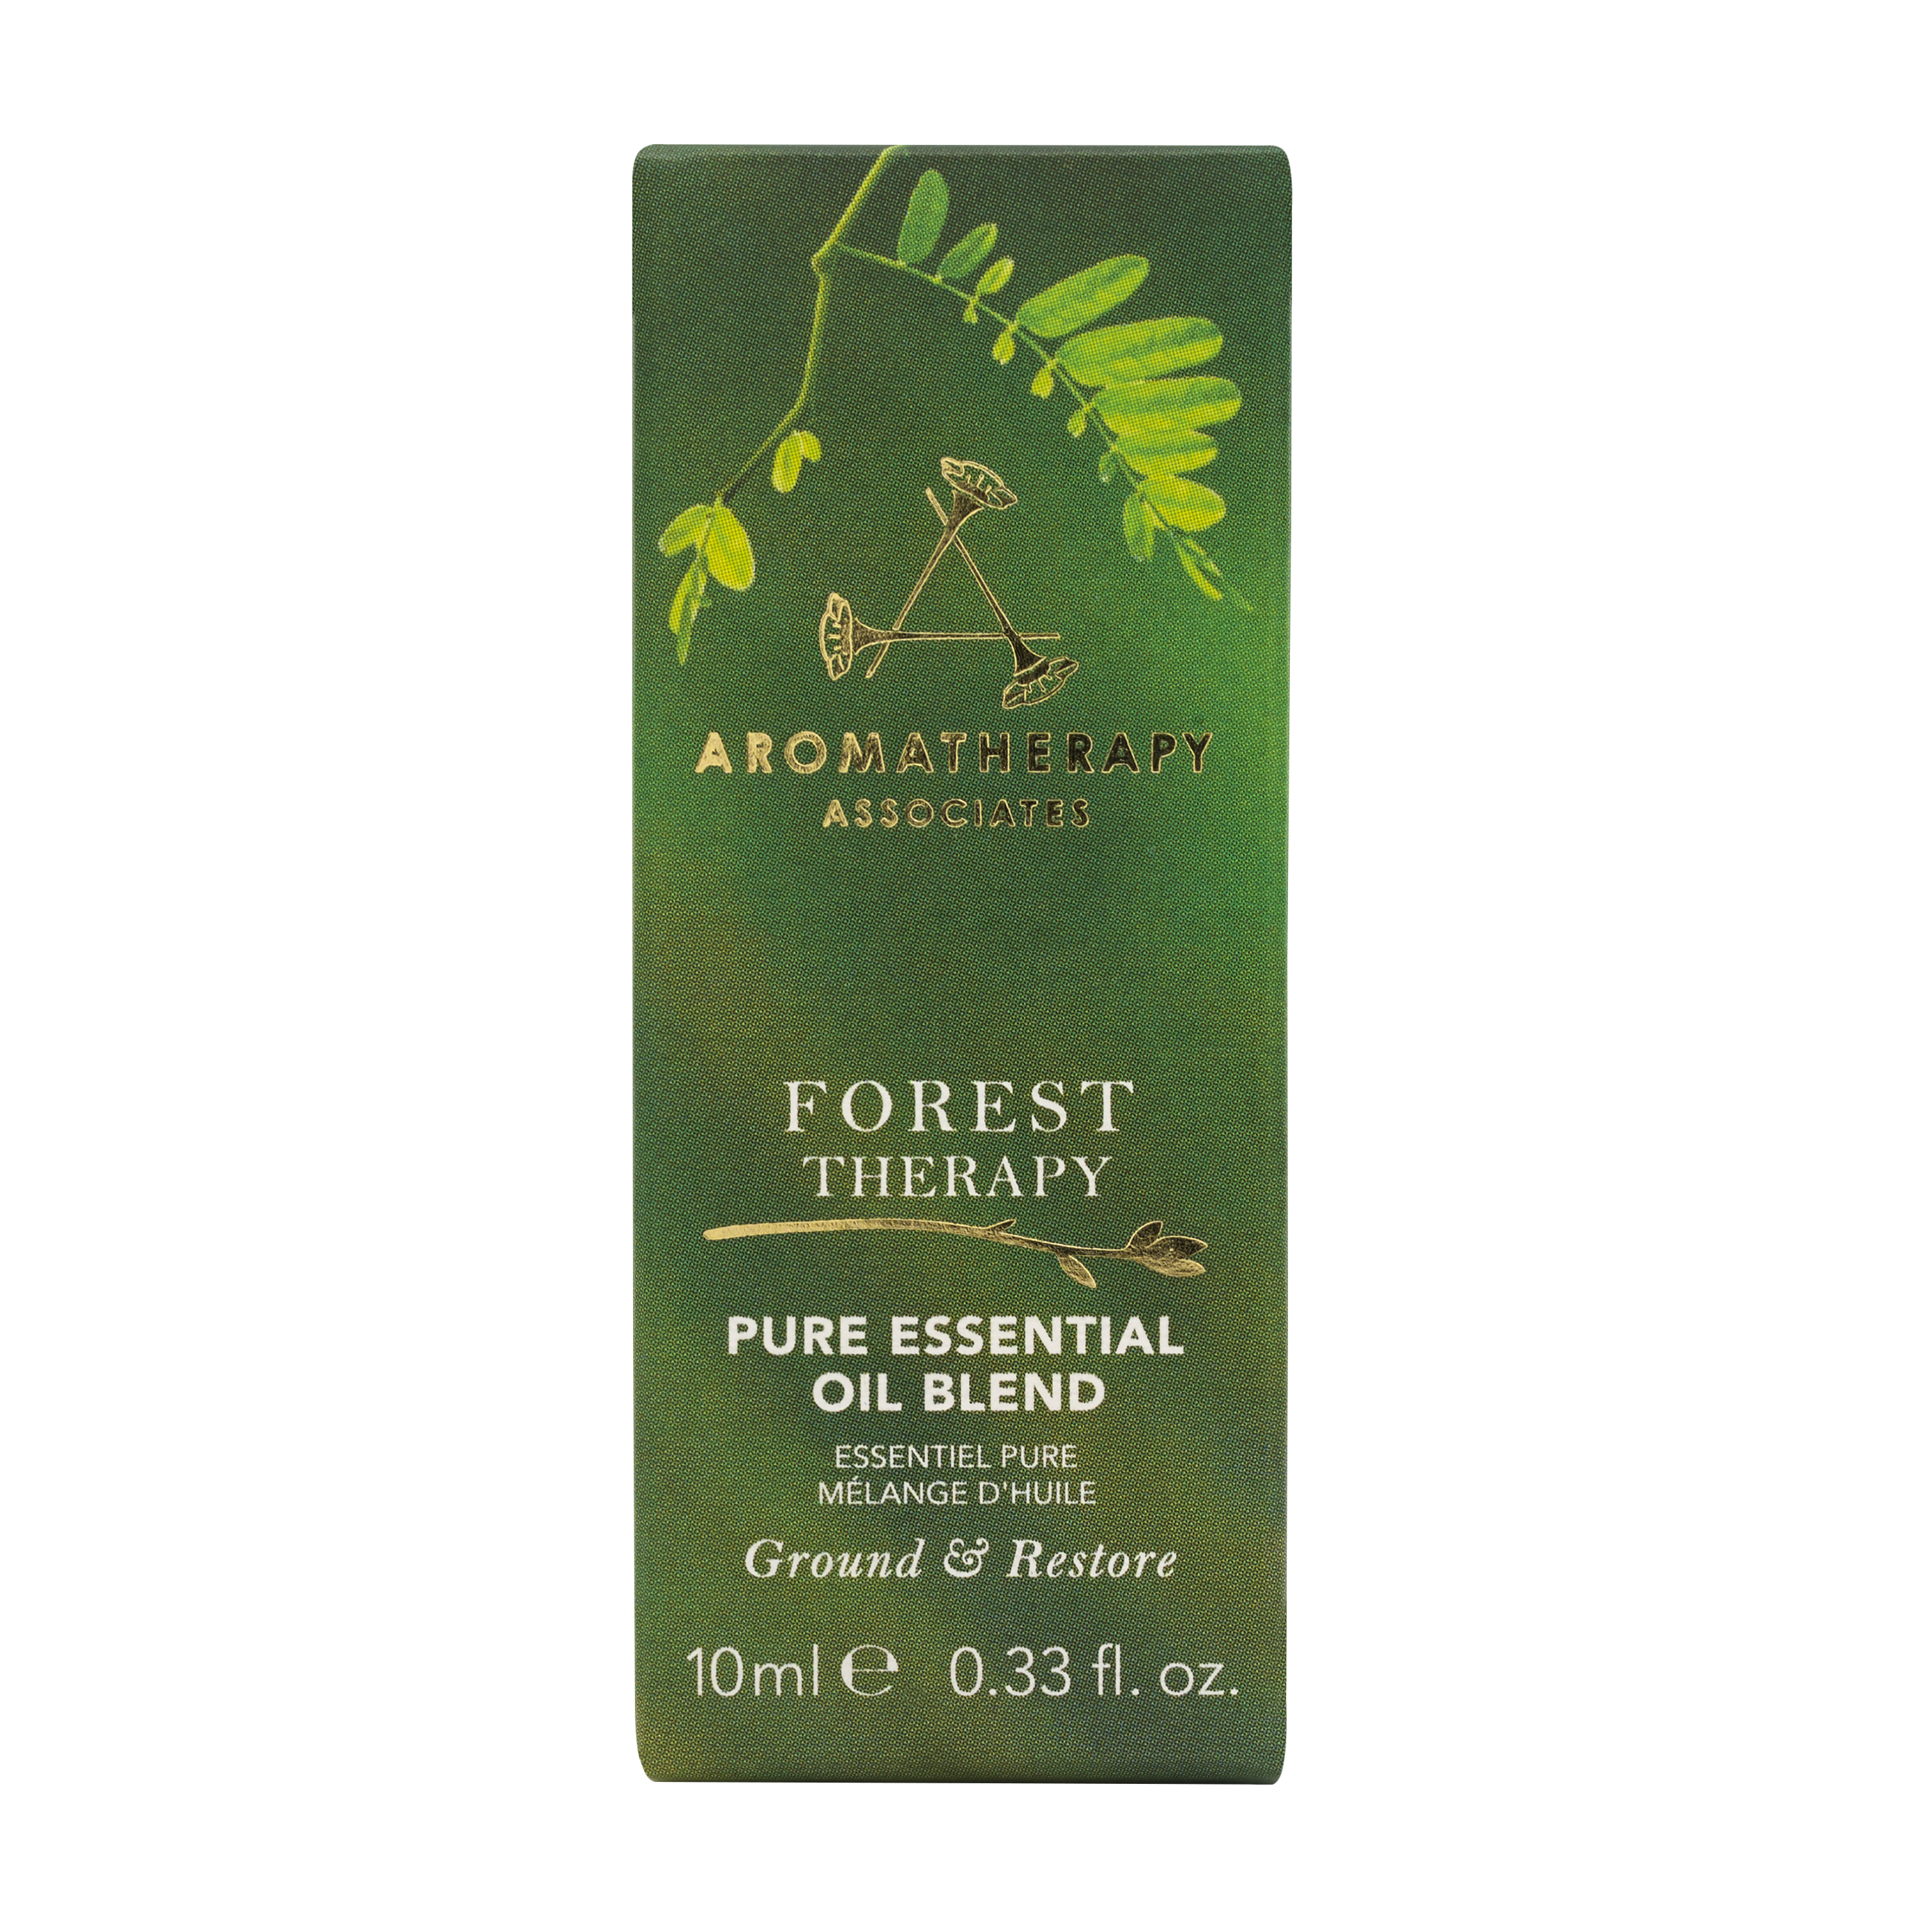 Forest Therapy Pure Essential Oil Blend Aromatherapy Associates